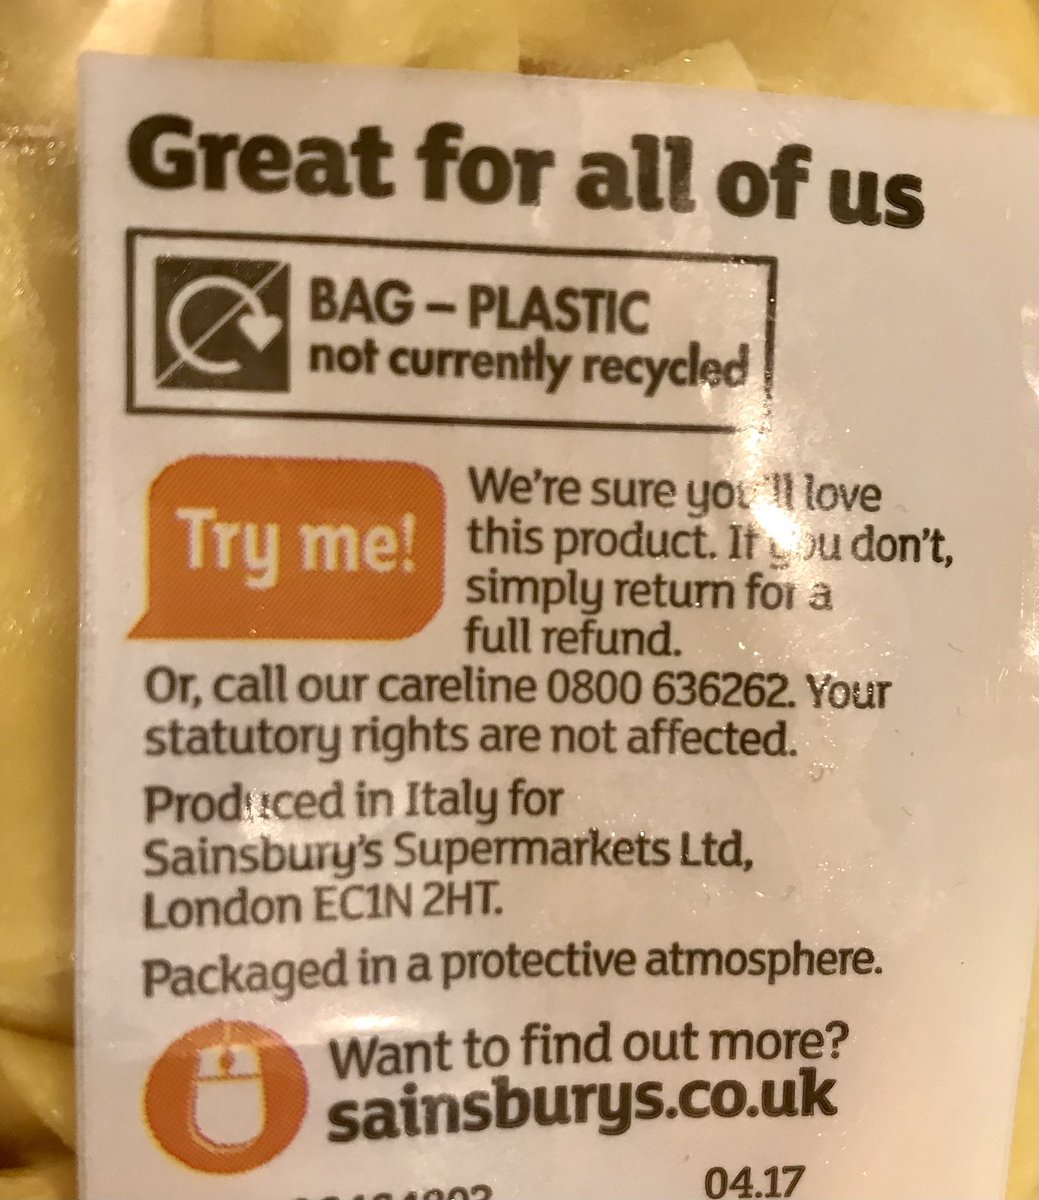 Nope, afraid not @sainsburys - this single use plastic bag really isn't great for all of us.

0 / 10 must try harder

#PlasticPollution 
#2minutebeachclean
#plasticbusters